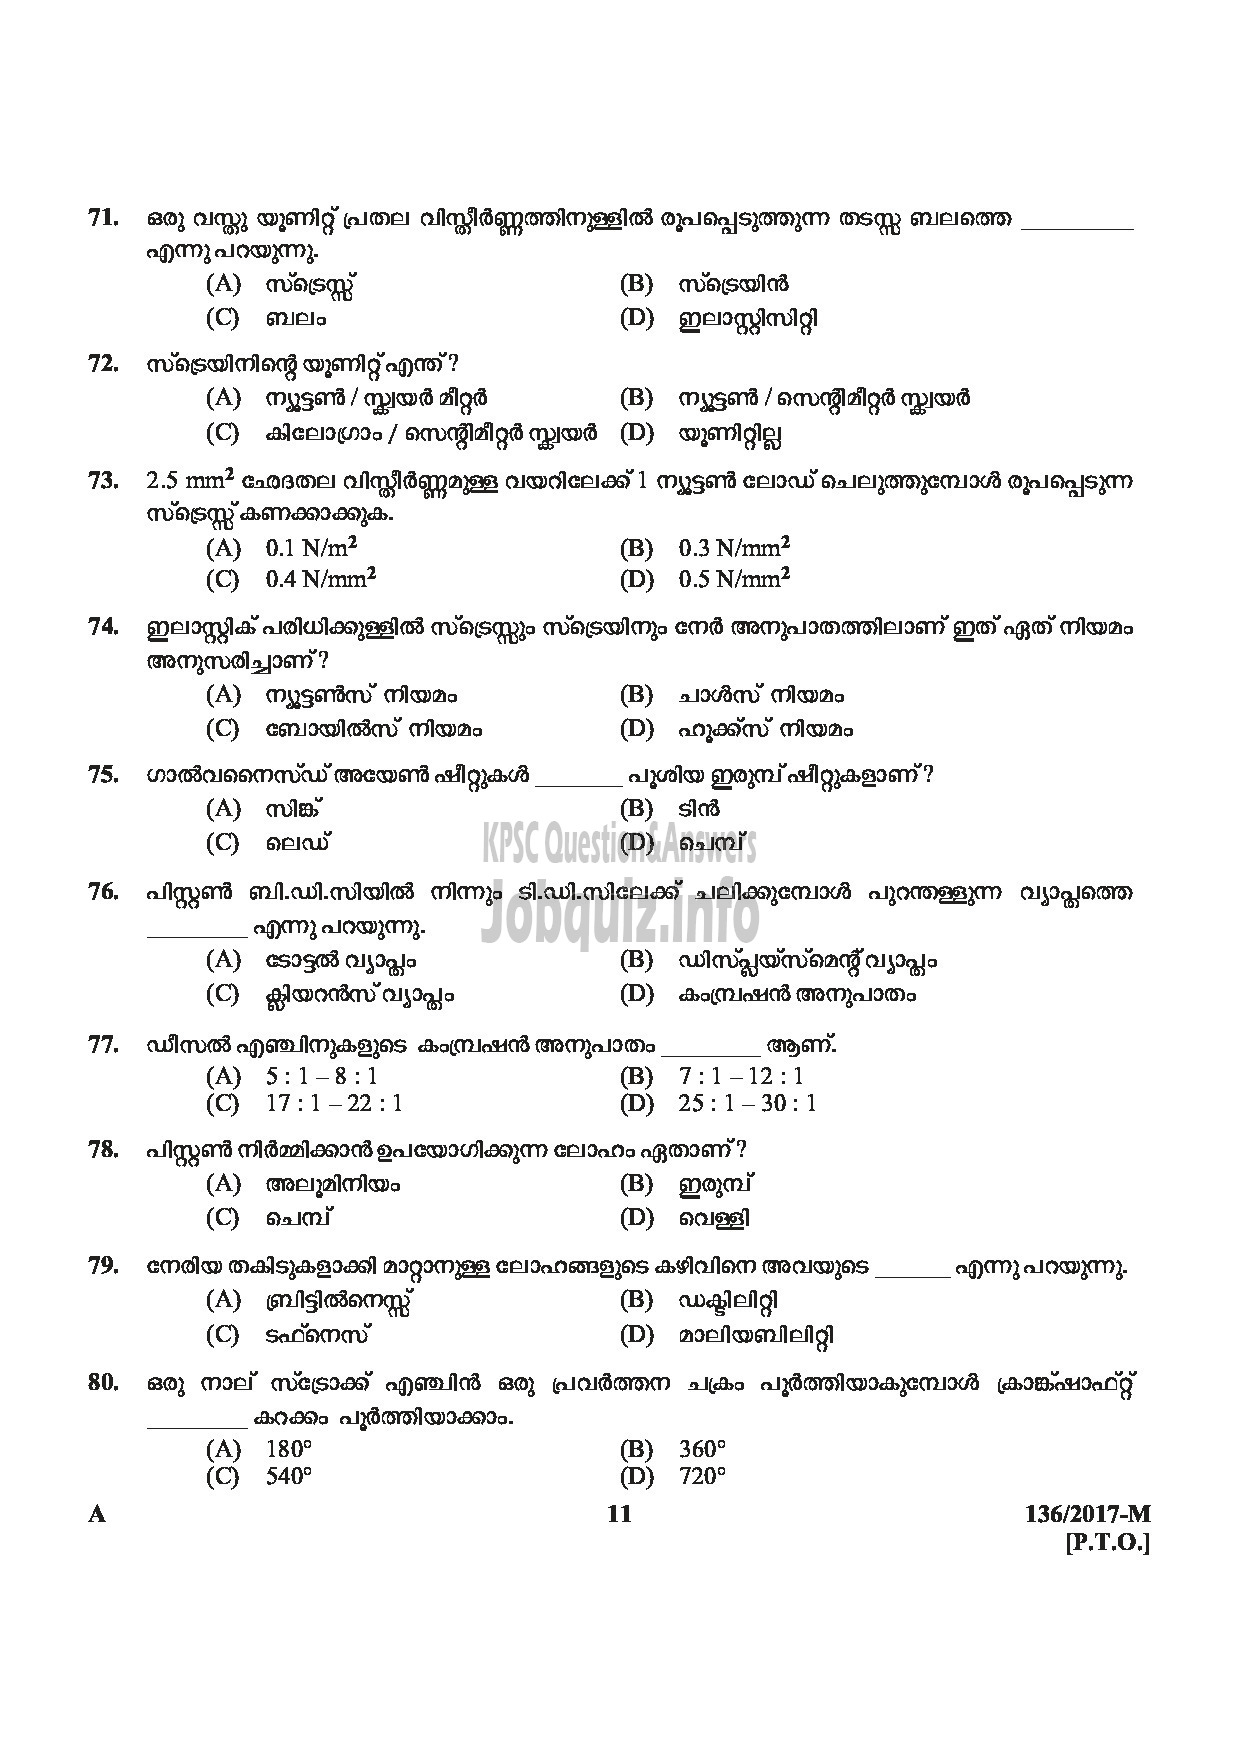 Kerala PSC Question Paper - METER READER/SPOT BILLER SPECIAL RECRUITMENT FROM AMONG ST ONLY MEDIUM OF QUESTION MALAYALAM-11